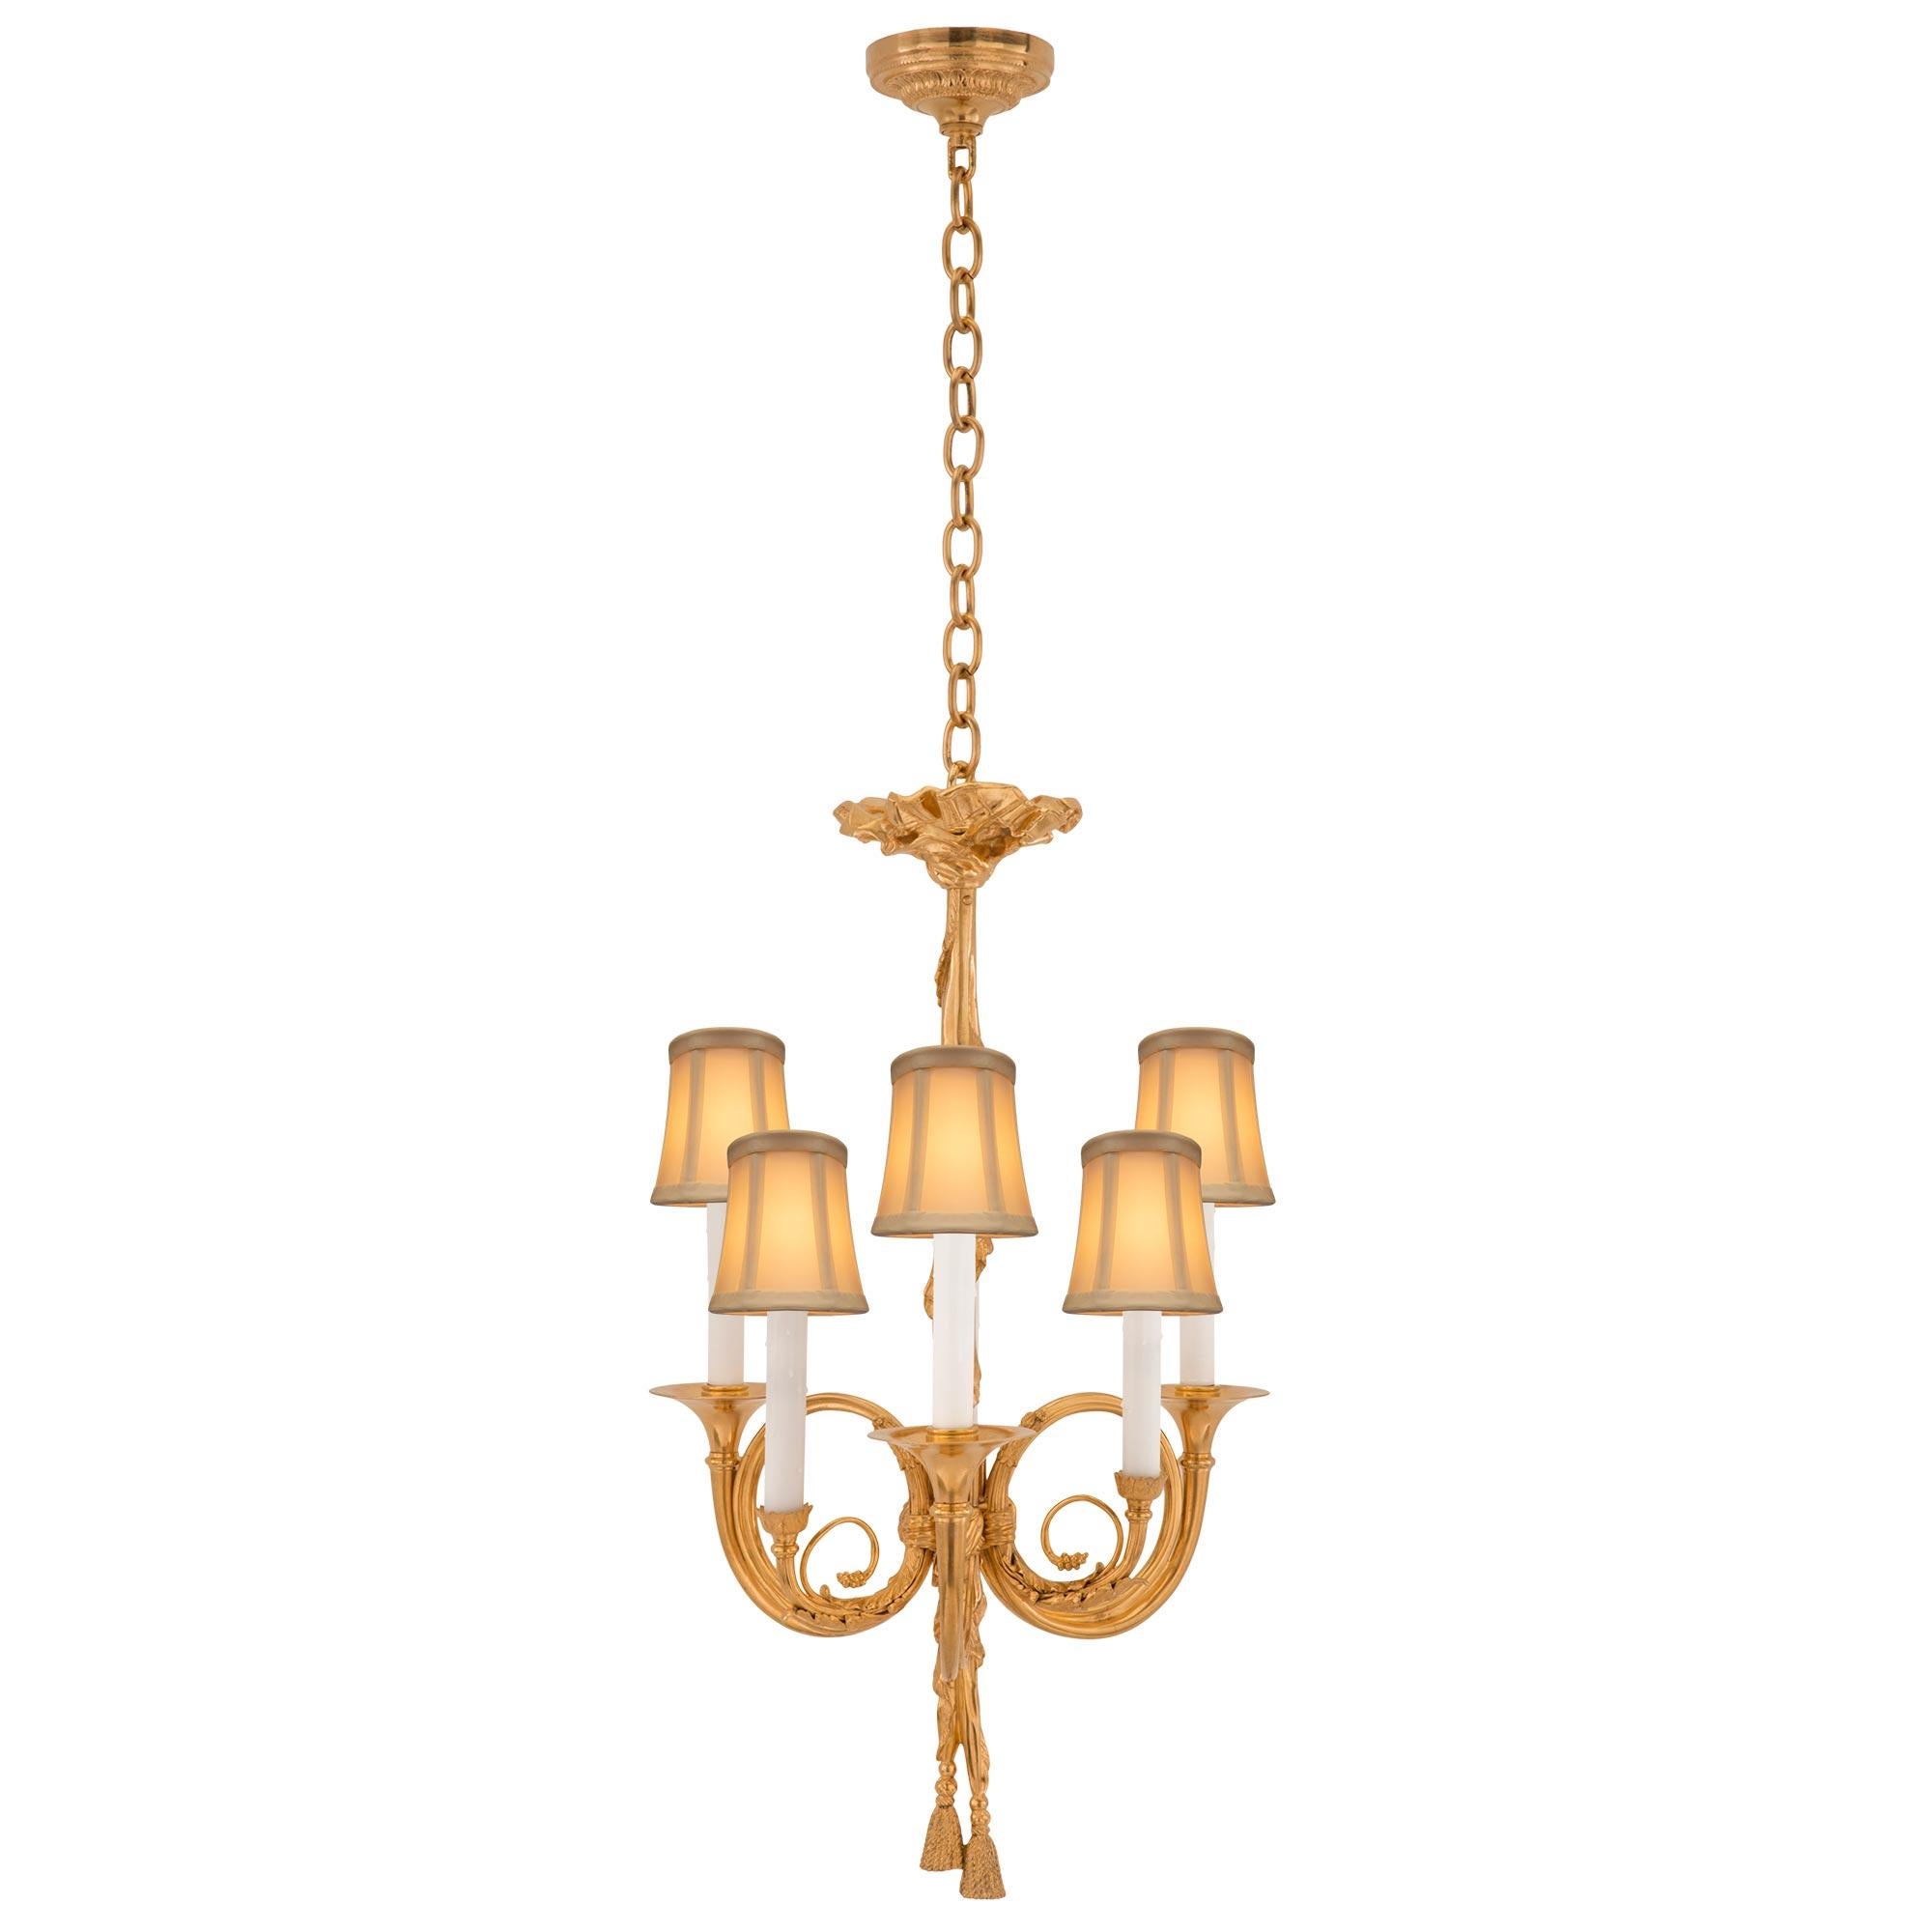 A beautiful French 19th century Louis XVI st. ormolu chandelier. The six arm chandelier is centered by charming finely detailed tied tassels below a wonderfully executed draped theatrical curtain like design. At the center are three scrolled French